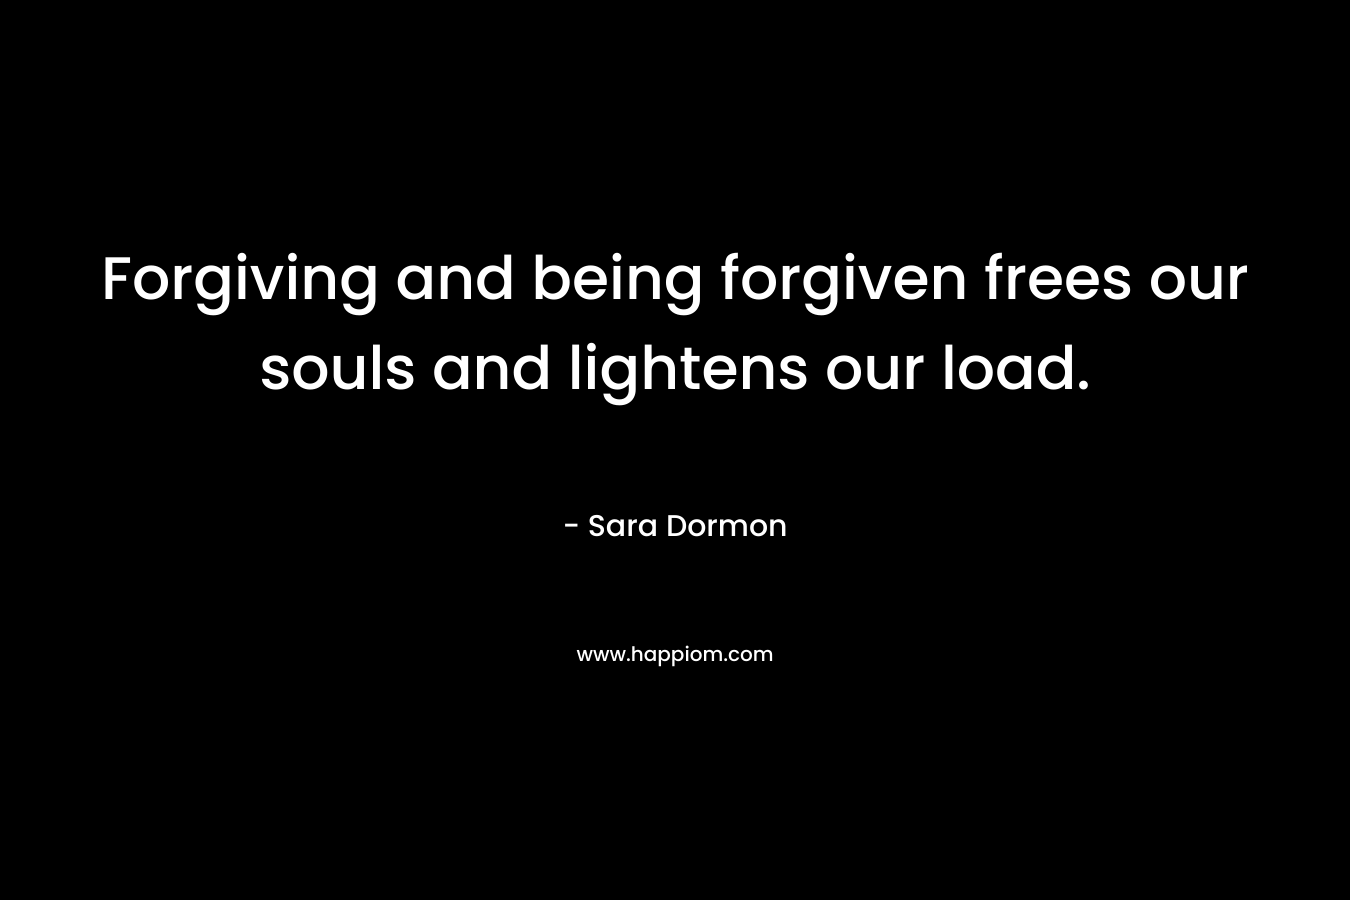 Forgiving and being forgiven frees our souls and lightens our load. – Sara Dormon